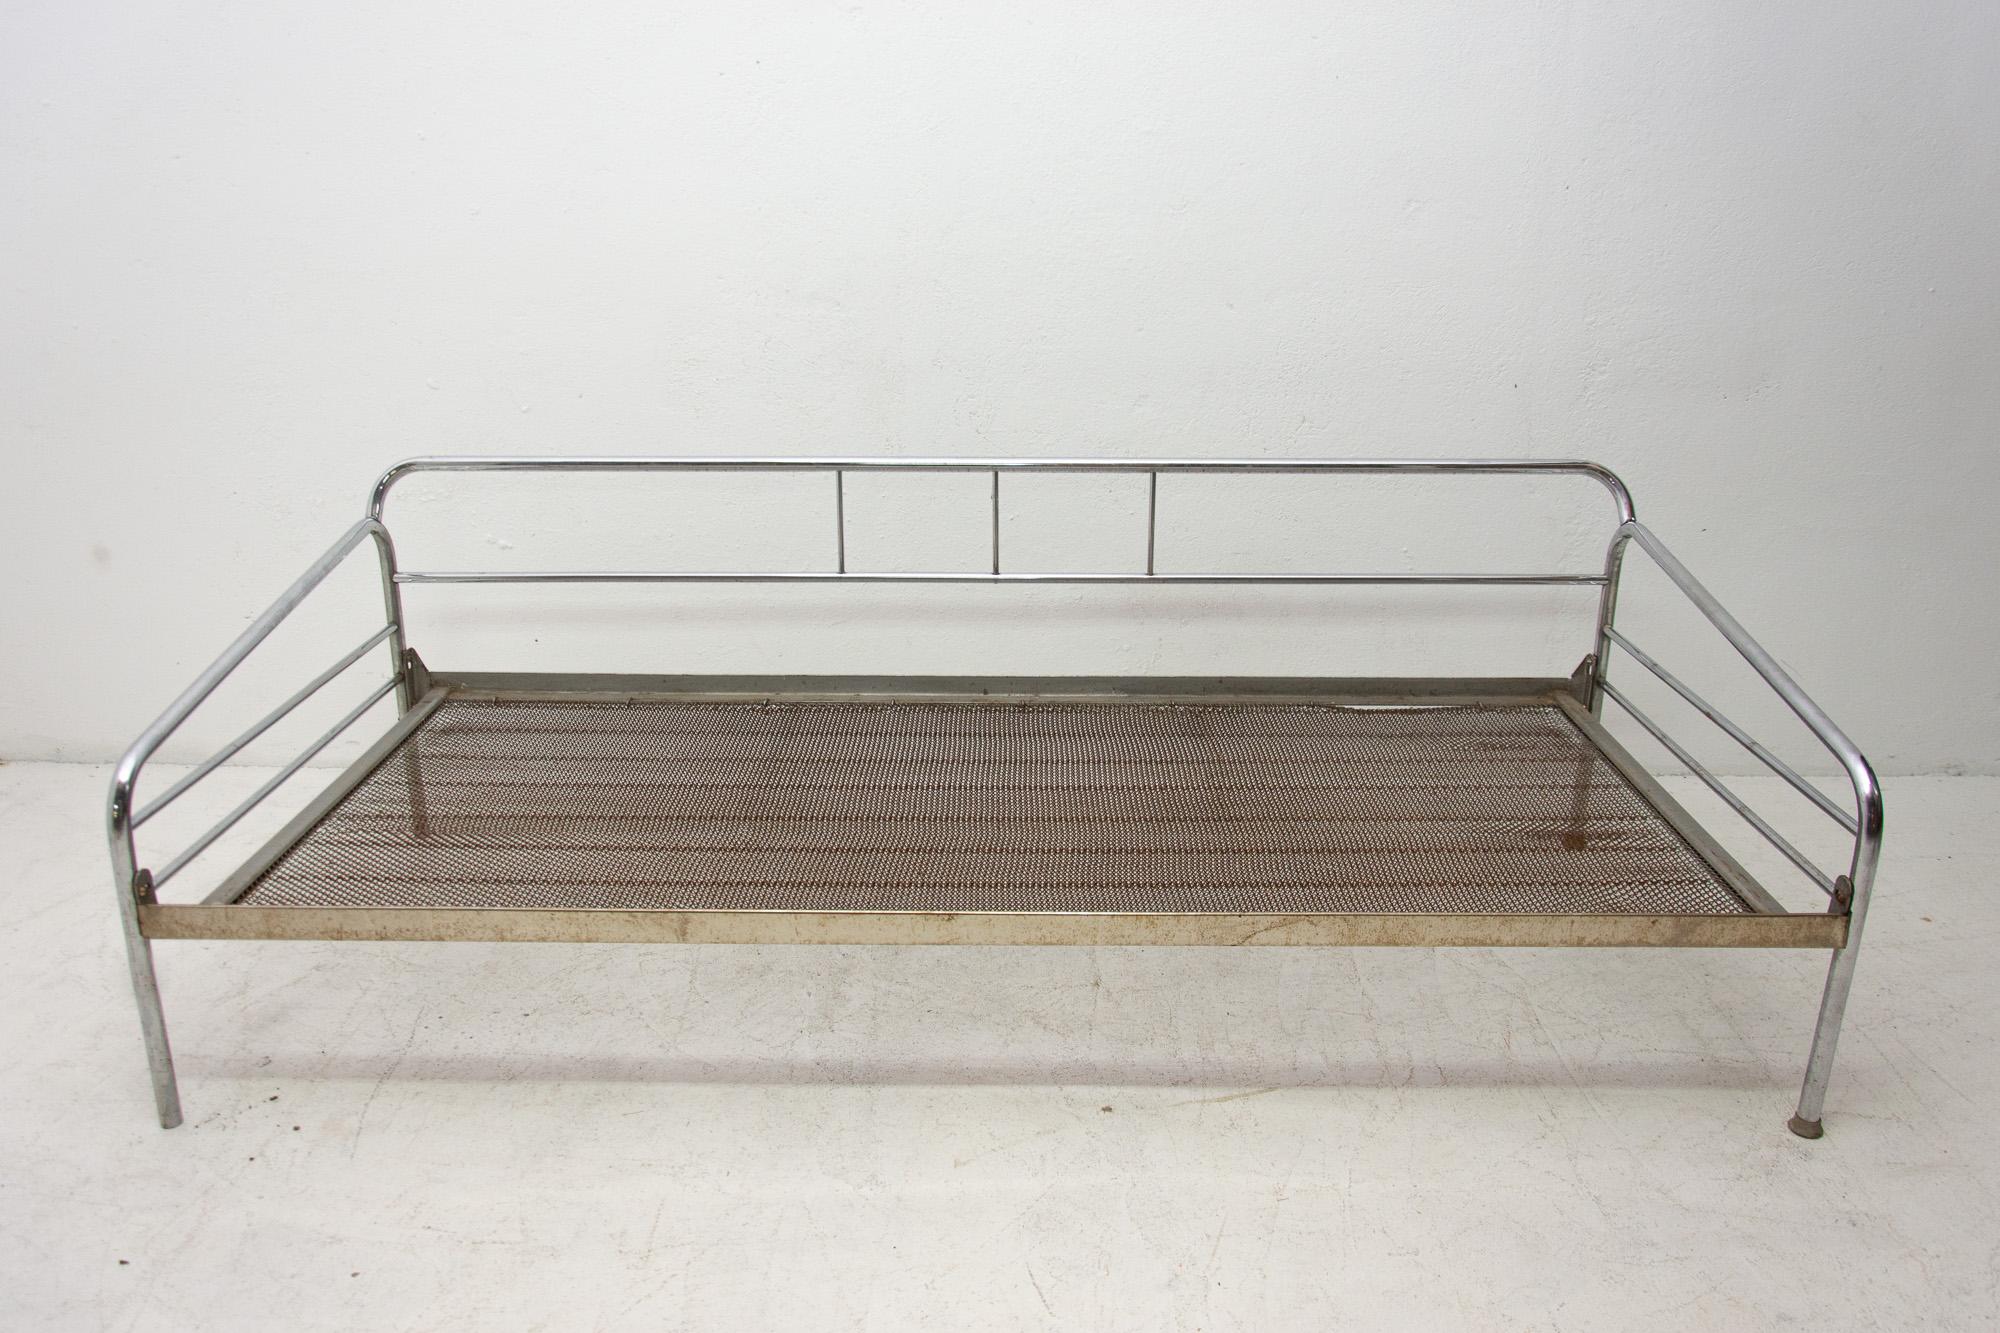 Chromed tubular steel sofa from the Bauhaus period, 1930s, Bohemia, probably produced by Hynek Gottwald. Chrome is generally in good vintage condition, shows some signs of age and use.